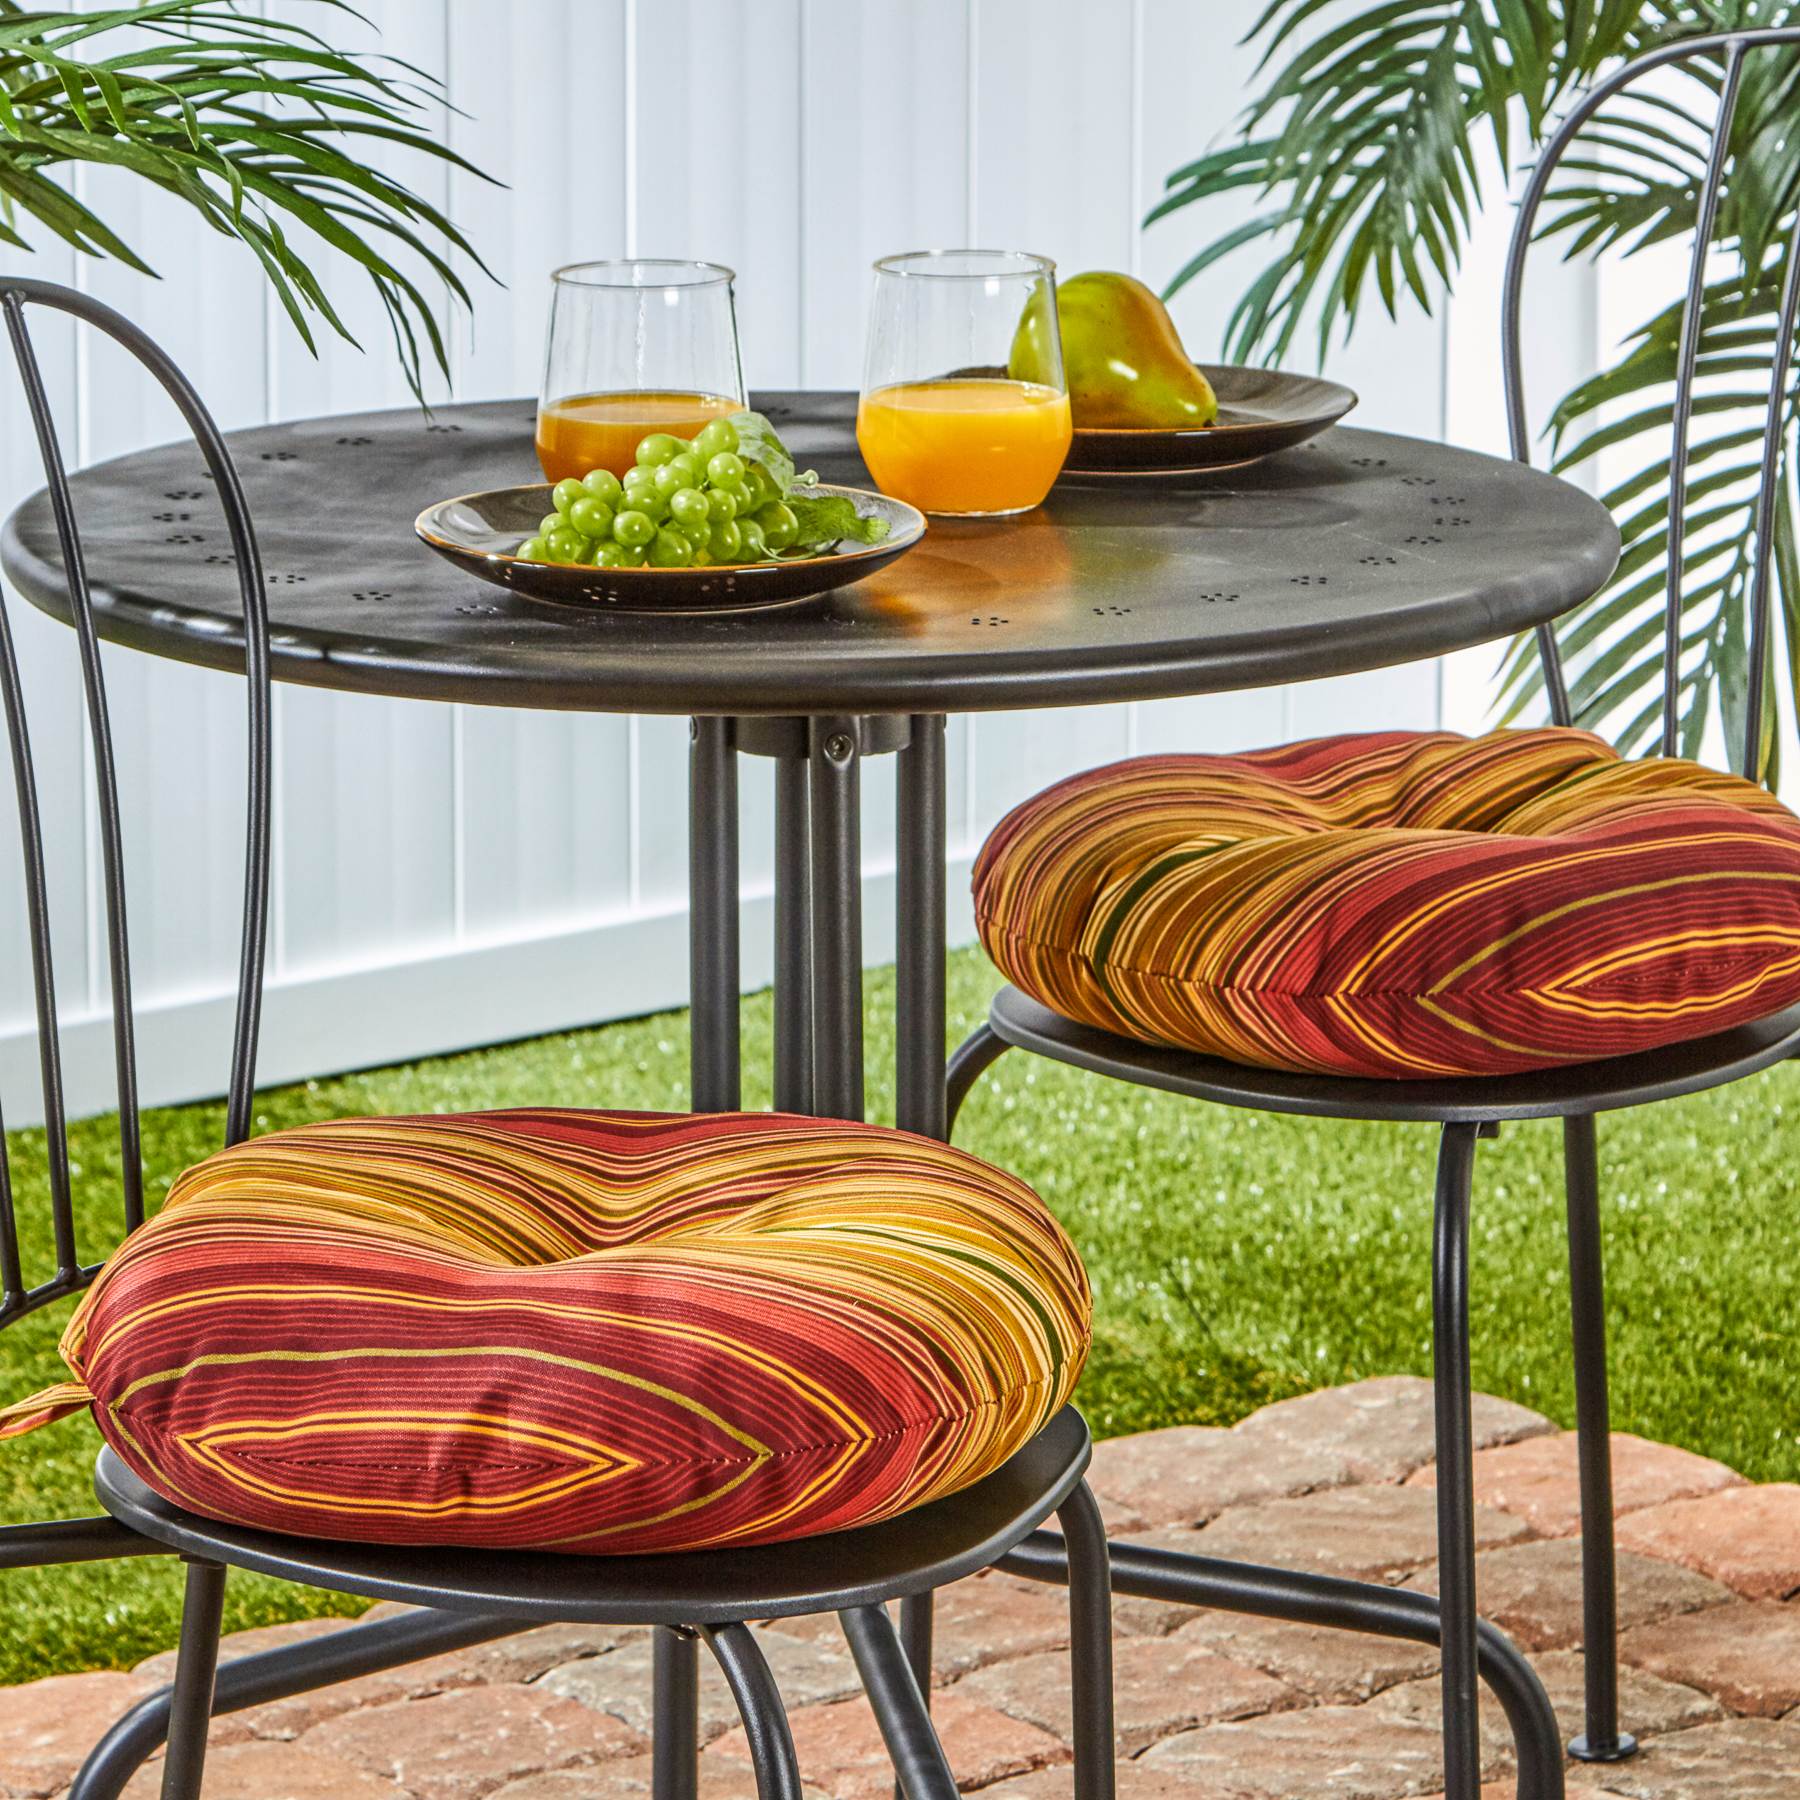 Greendale Home Fashions Kinnabari Stripe 15 in. Round Outdoor Reversible Bistro Seat Cushion (Set of 2) - image 3 of 6